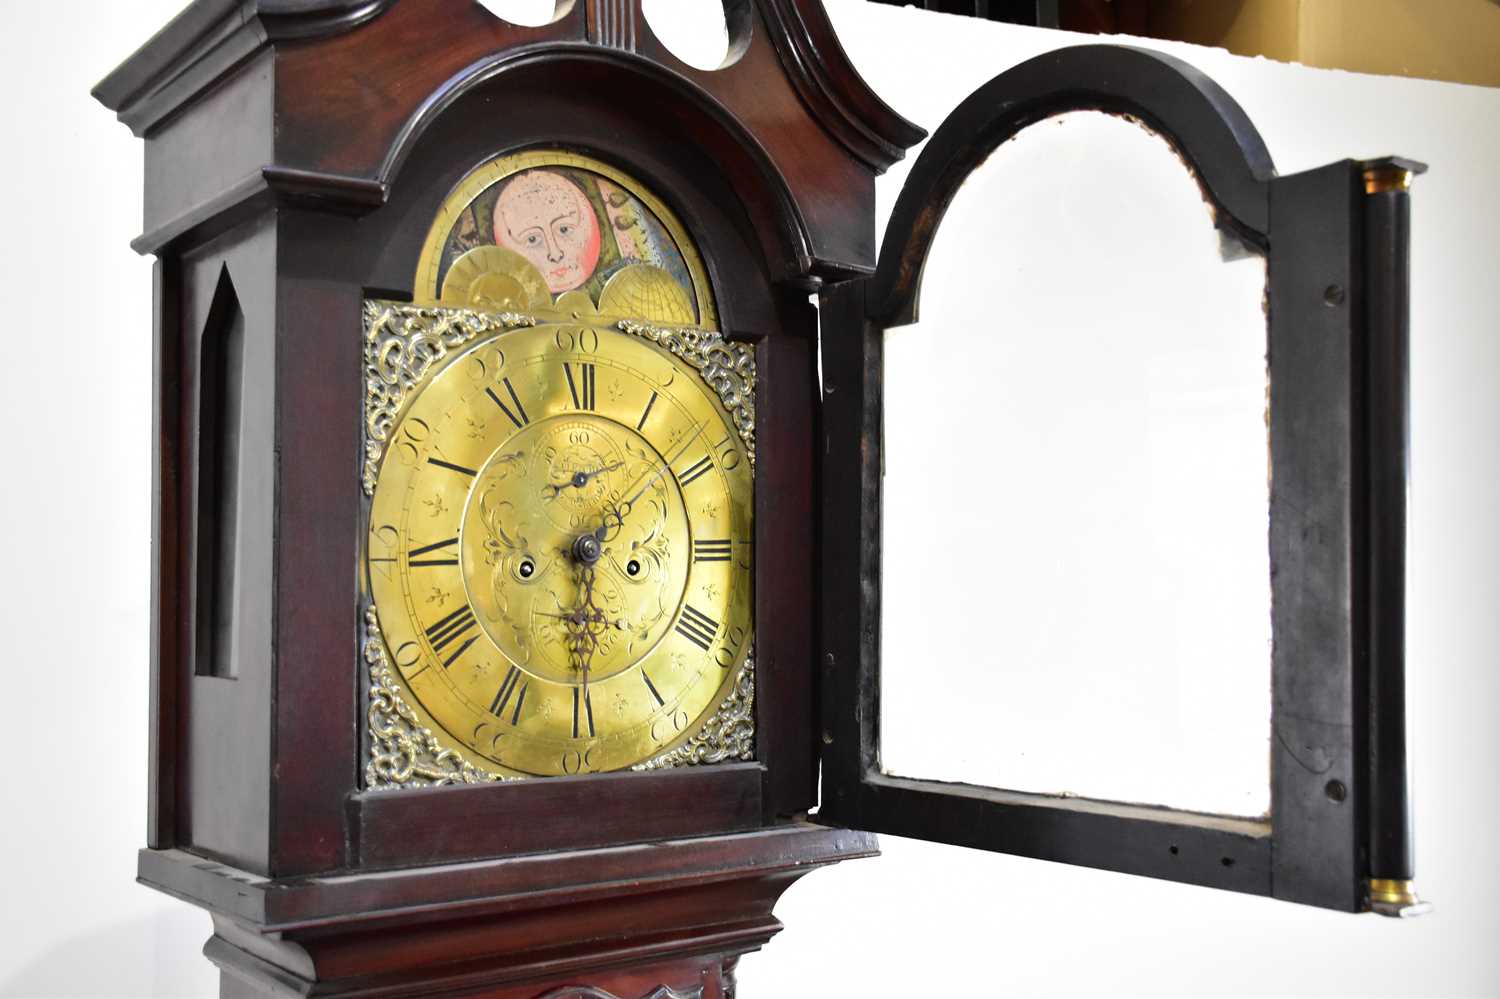 S FLETCHER, DEWSBURY; an 18th century eight day longcase clock, the brass face set with applied - Image 2 of 4